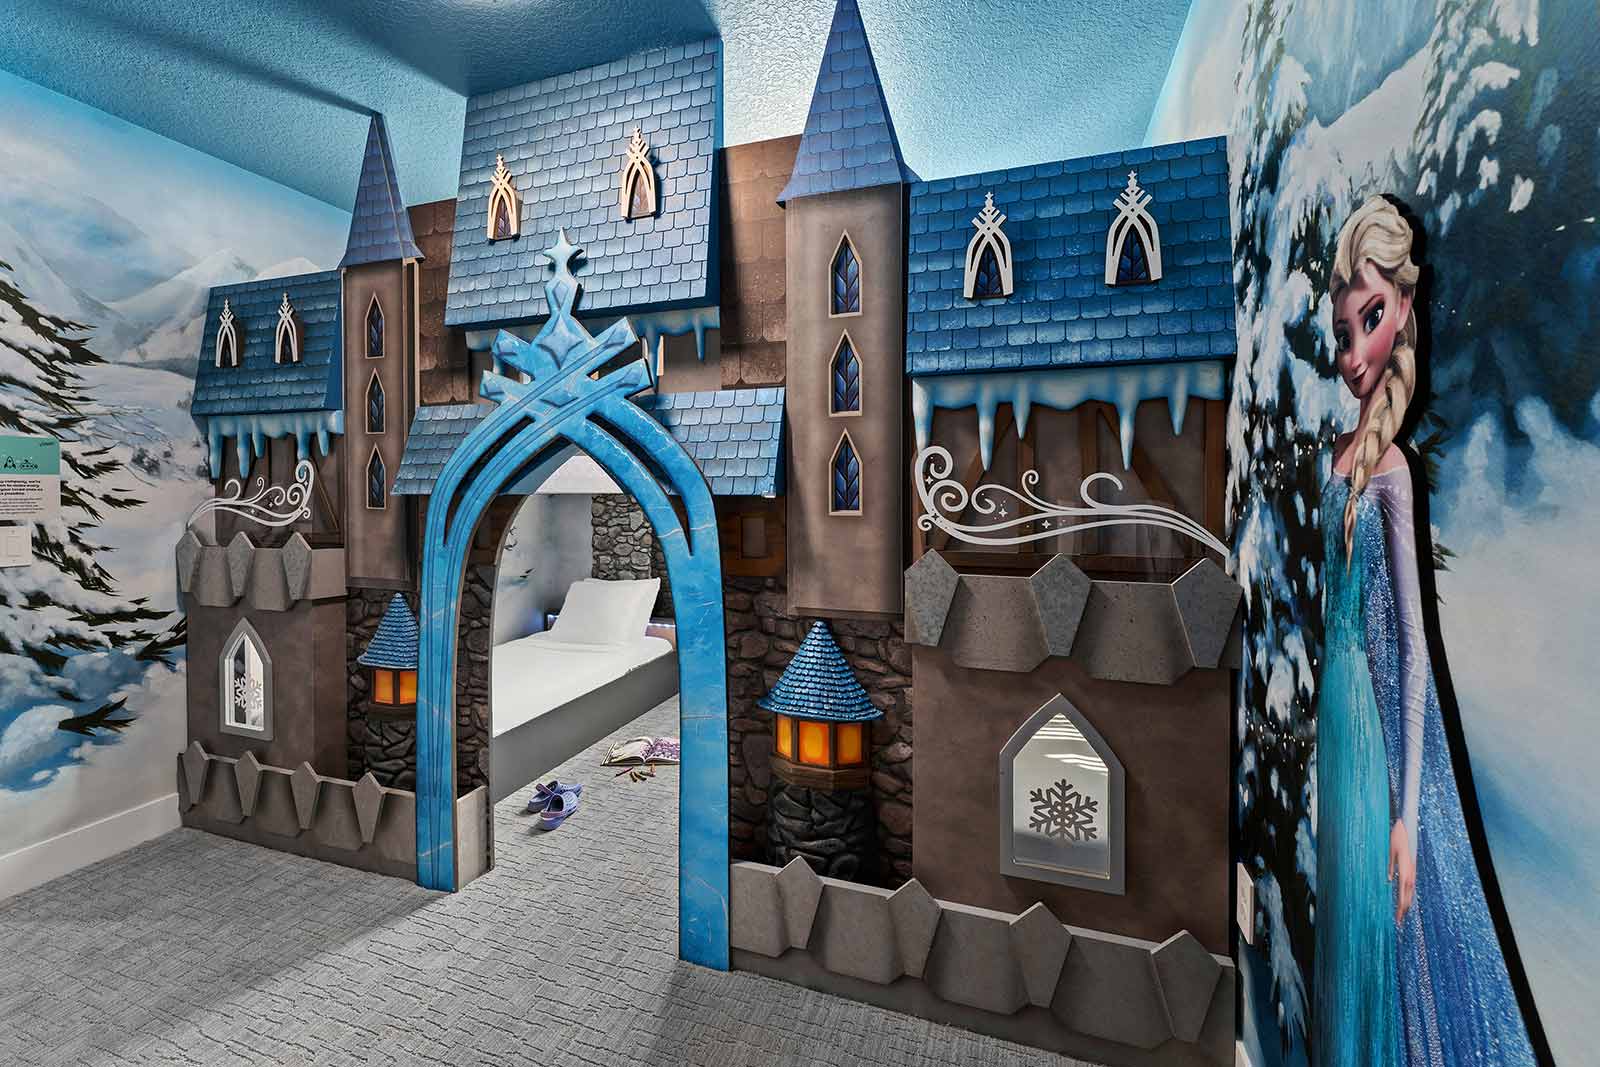 Enchanted Castle Themed Bedroom on Second Floor